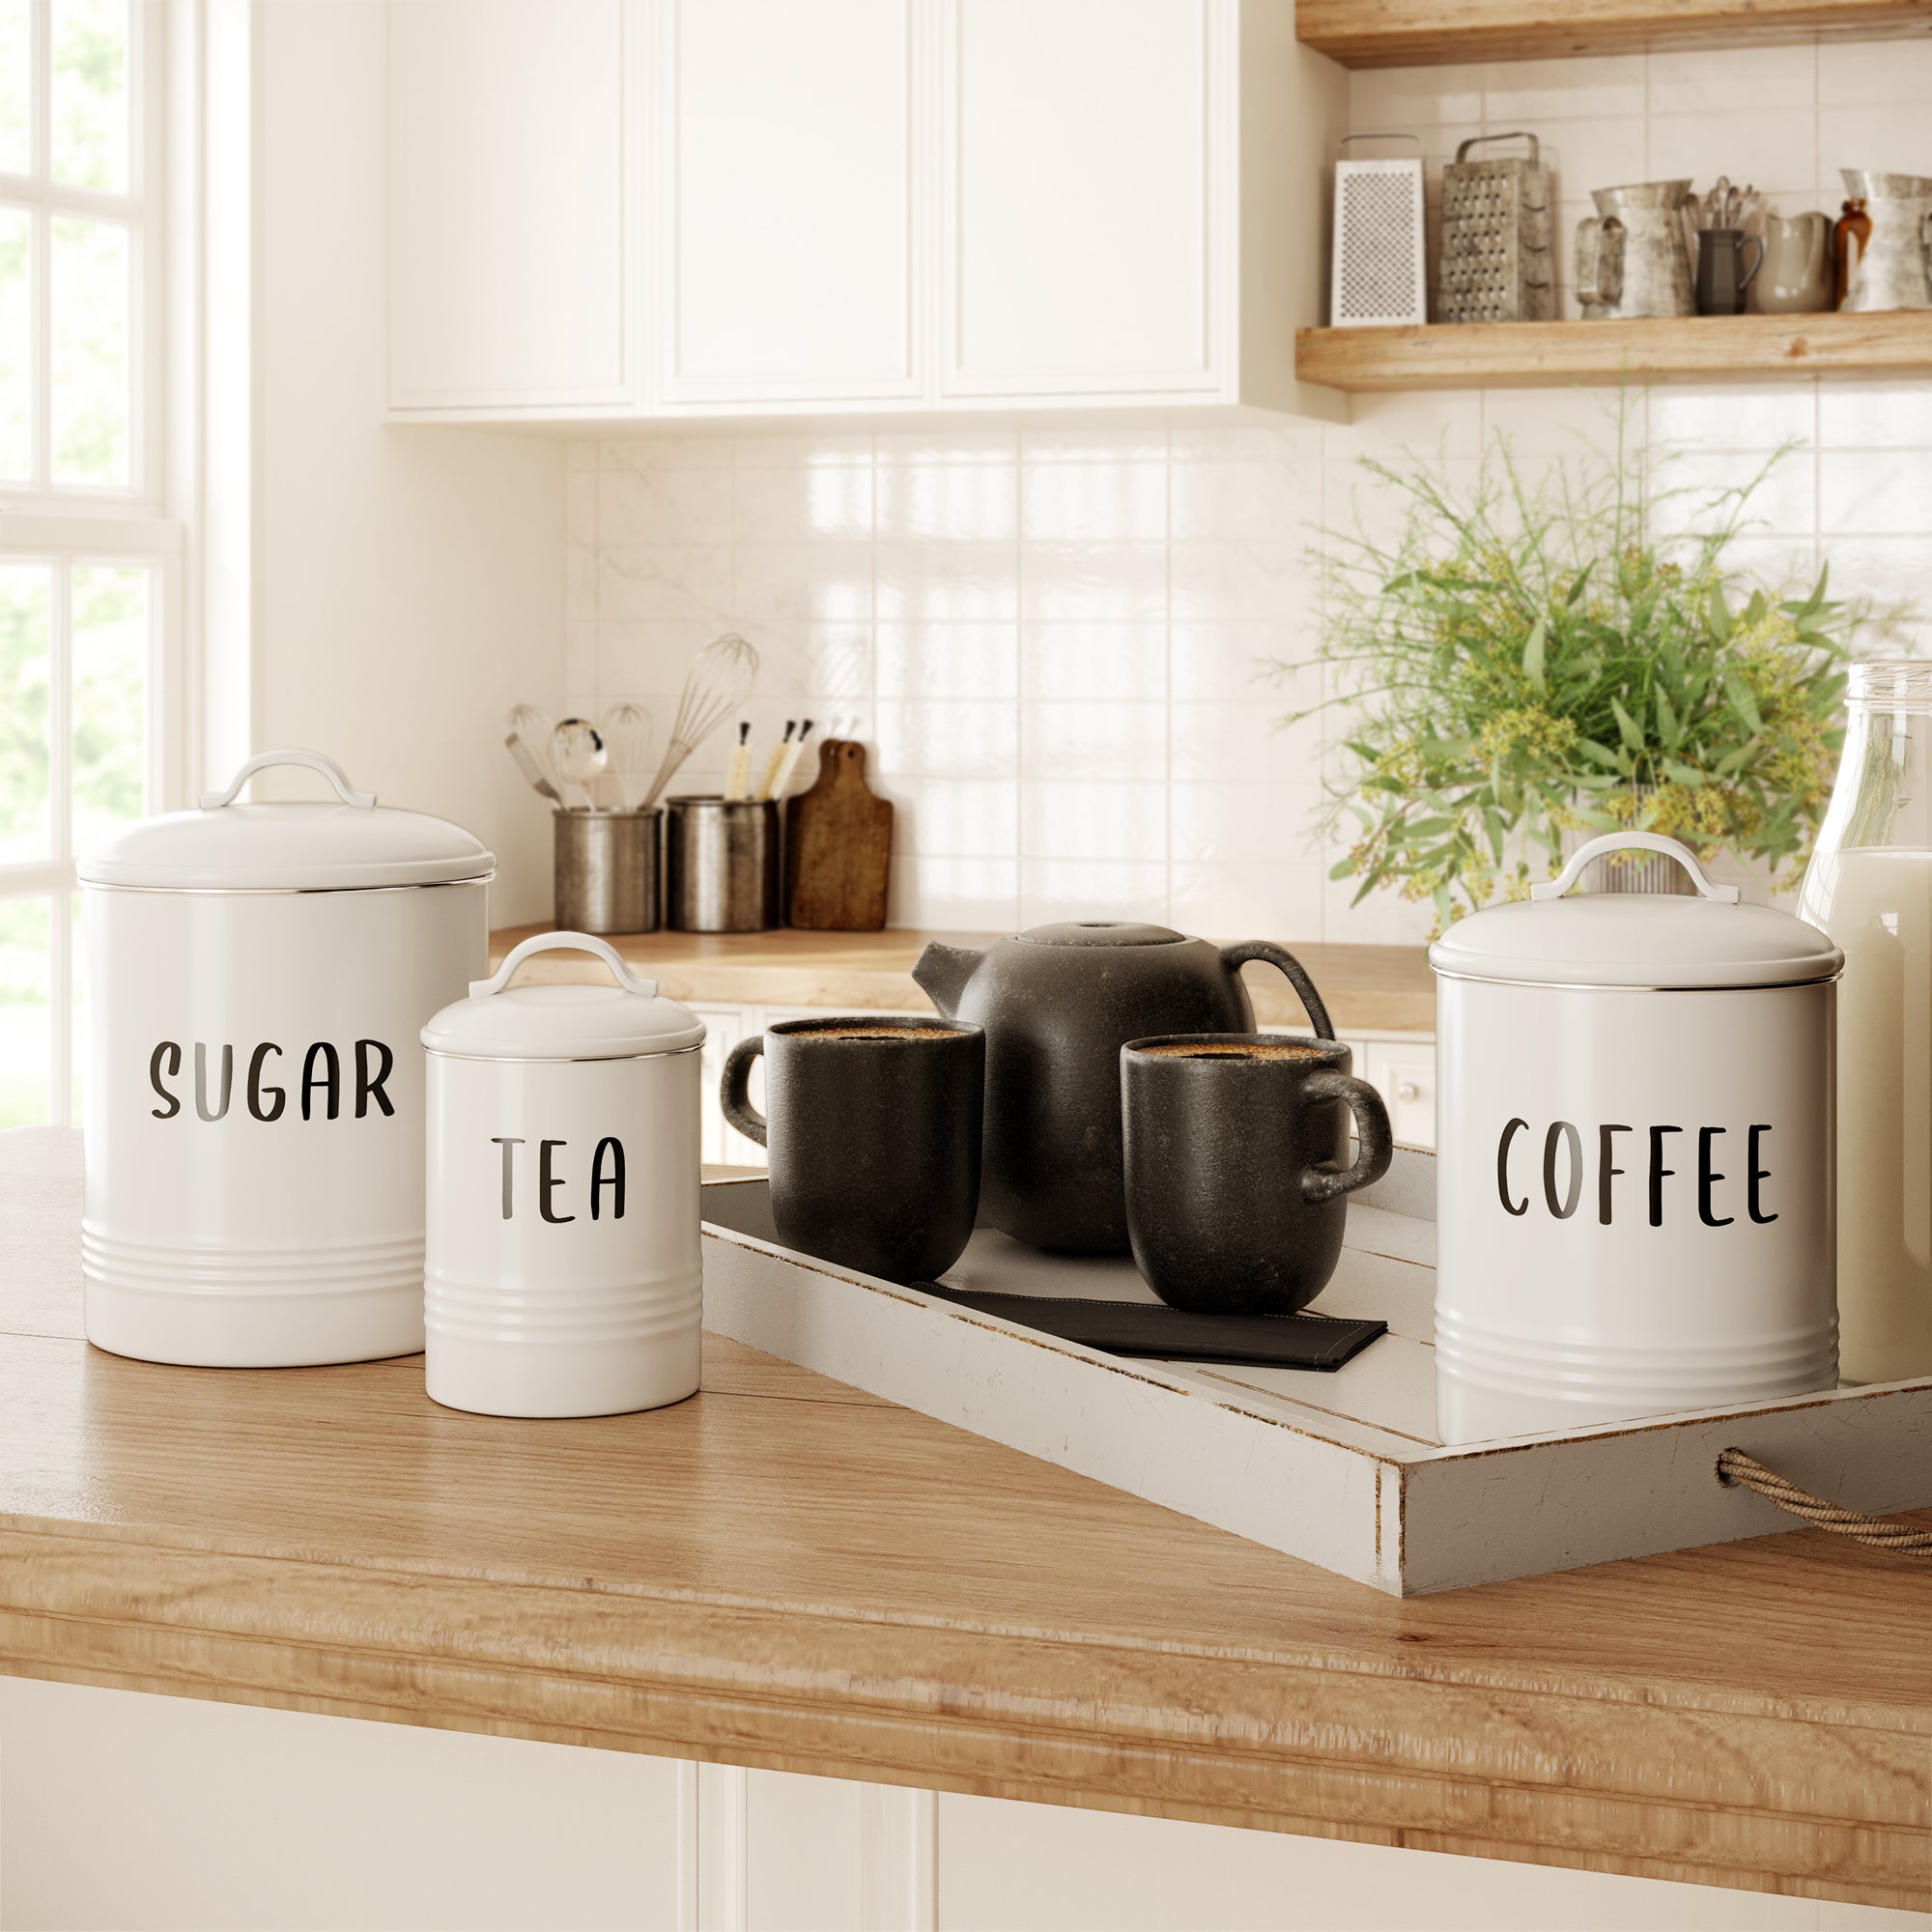 Barnyard Designs Canister Sets for Kitchen Counter Vintage Kitchen Canisters, Country Rustic Farmhouse Decor Kitchen, Coffee Tea Sugar Farmhouse